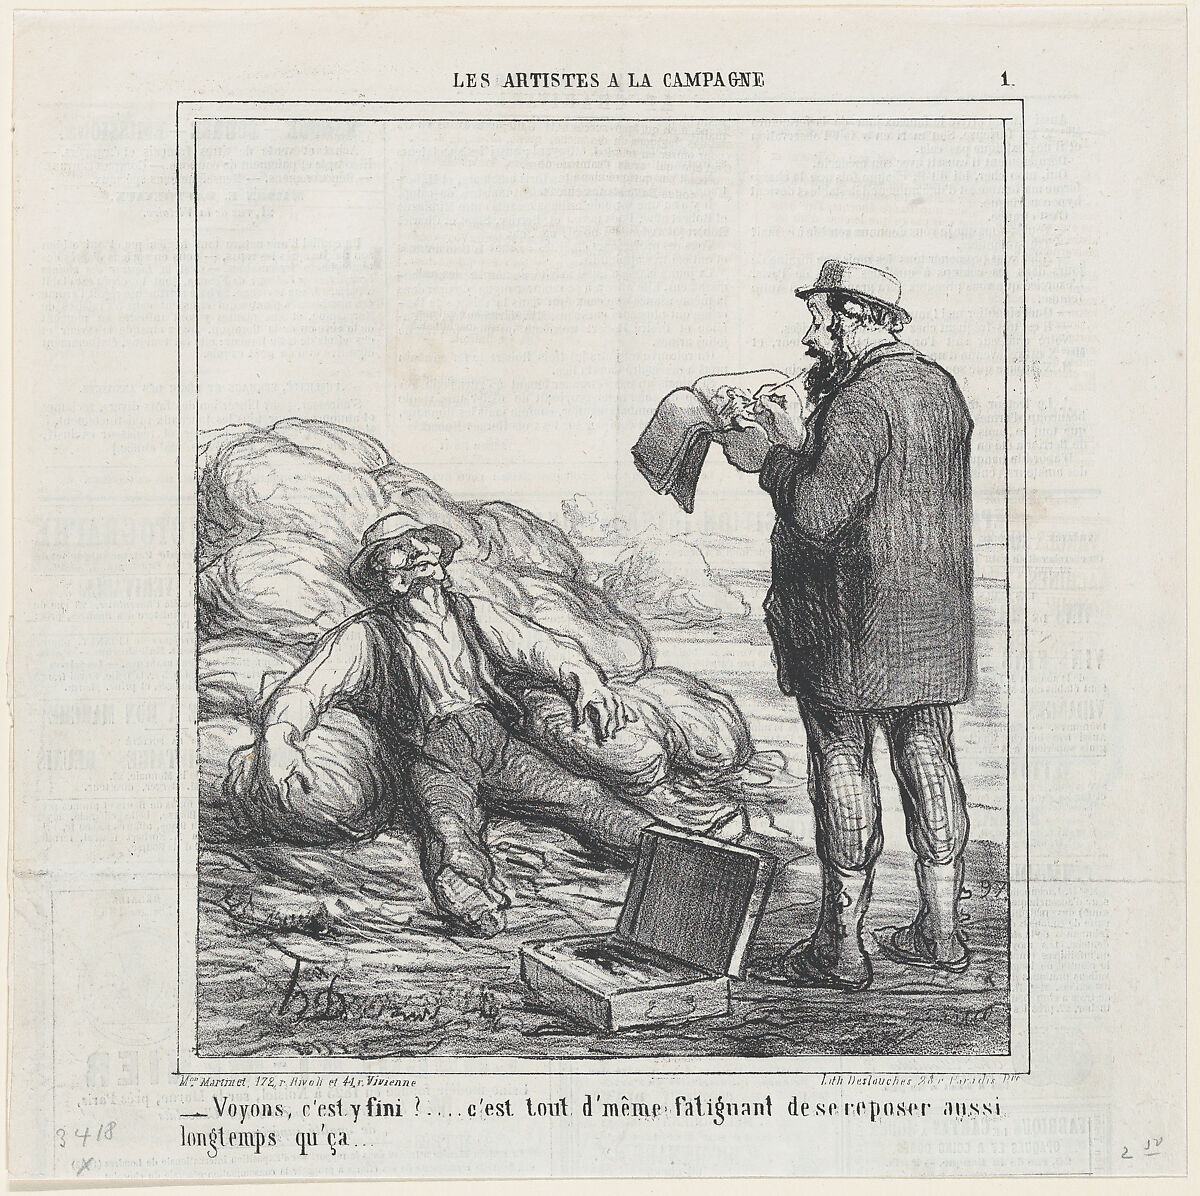 Well, are you finally finished?... after all, it's tiring to relax for such a long time, from "The countryside artists", Honoré Daumier (French, Marseilles 1808–1879 Valmondois), Lithograph on newsprint 